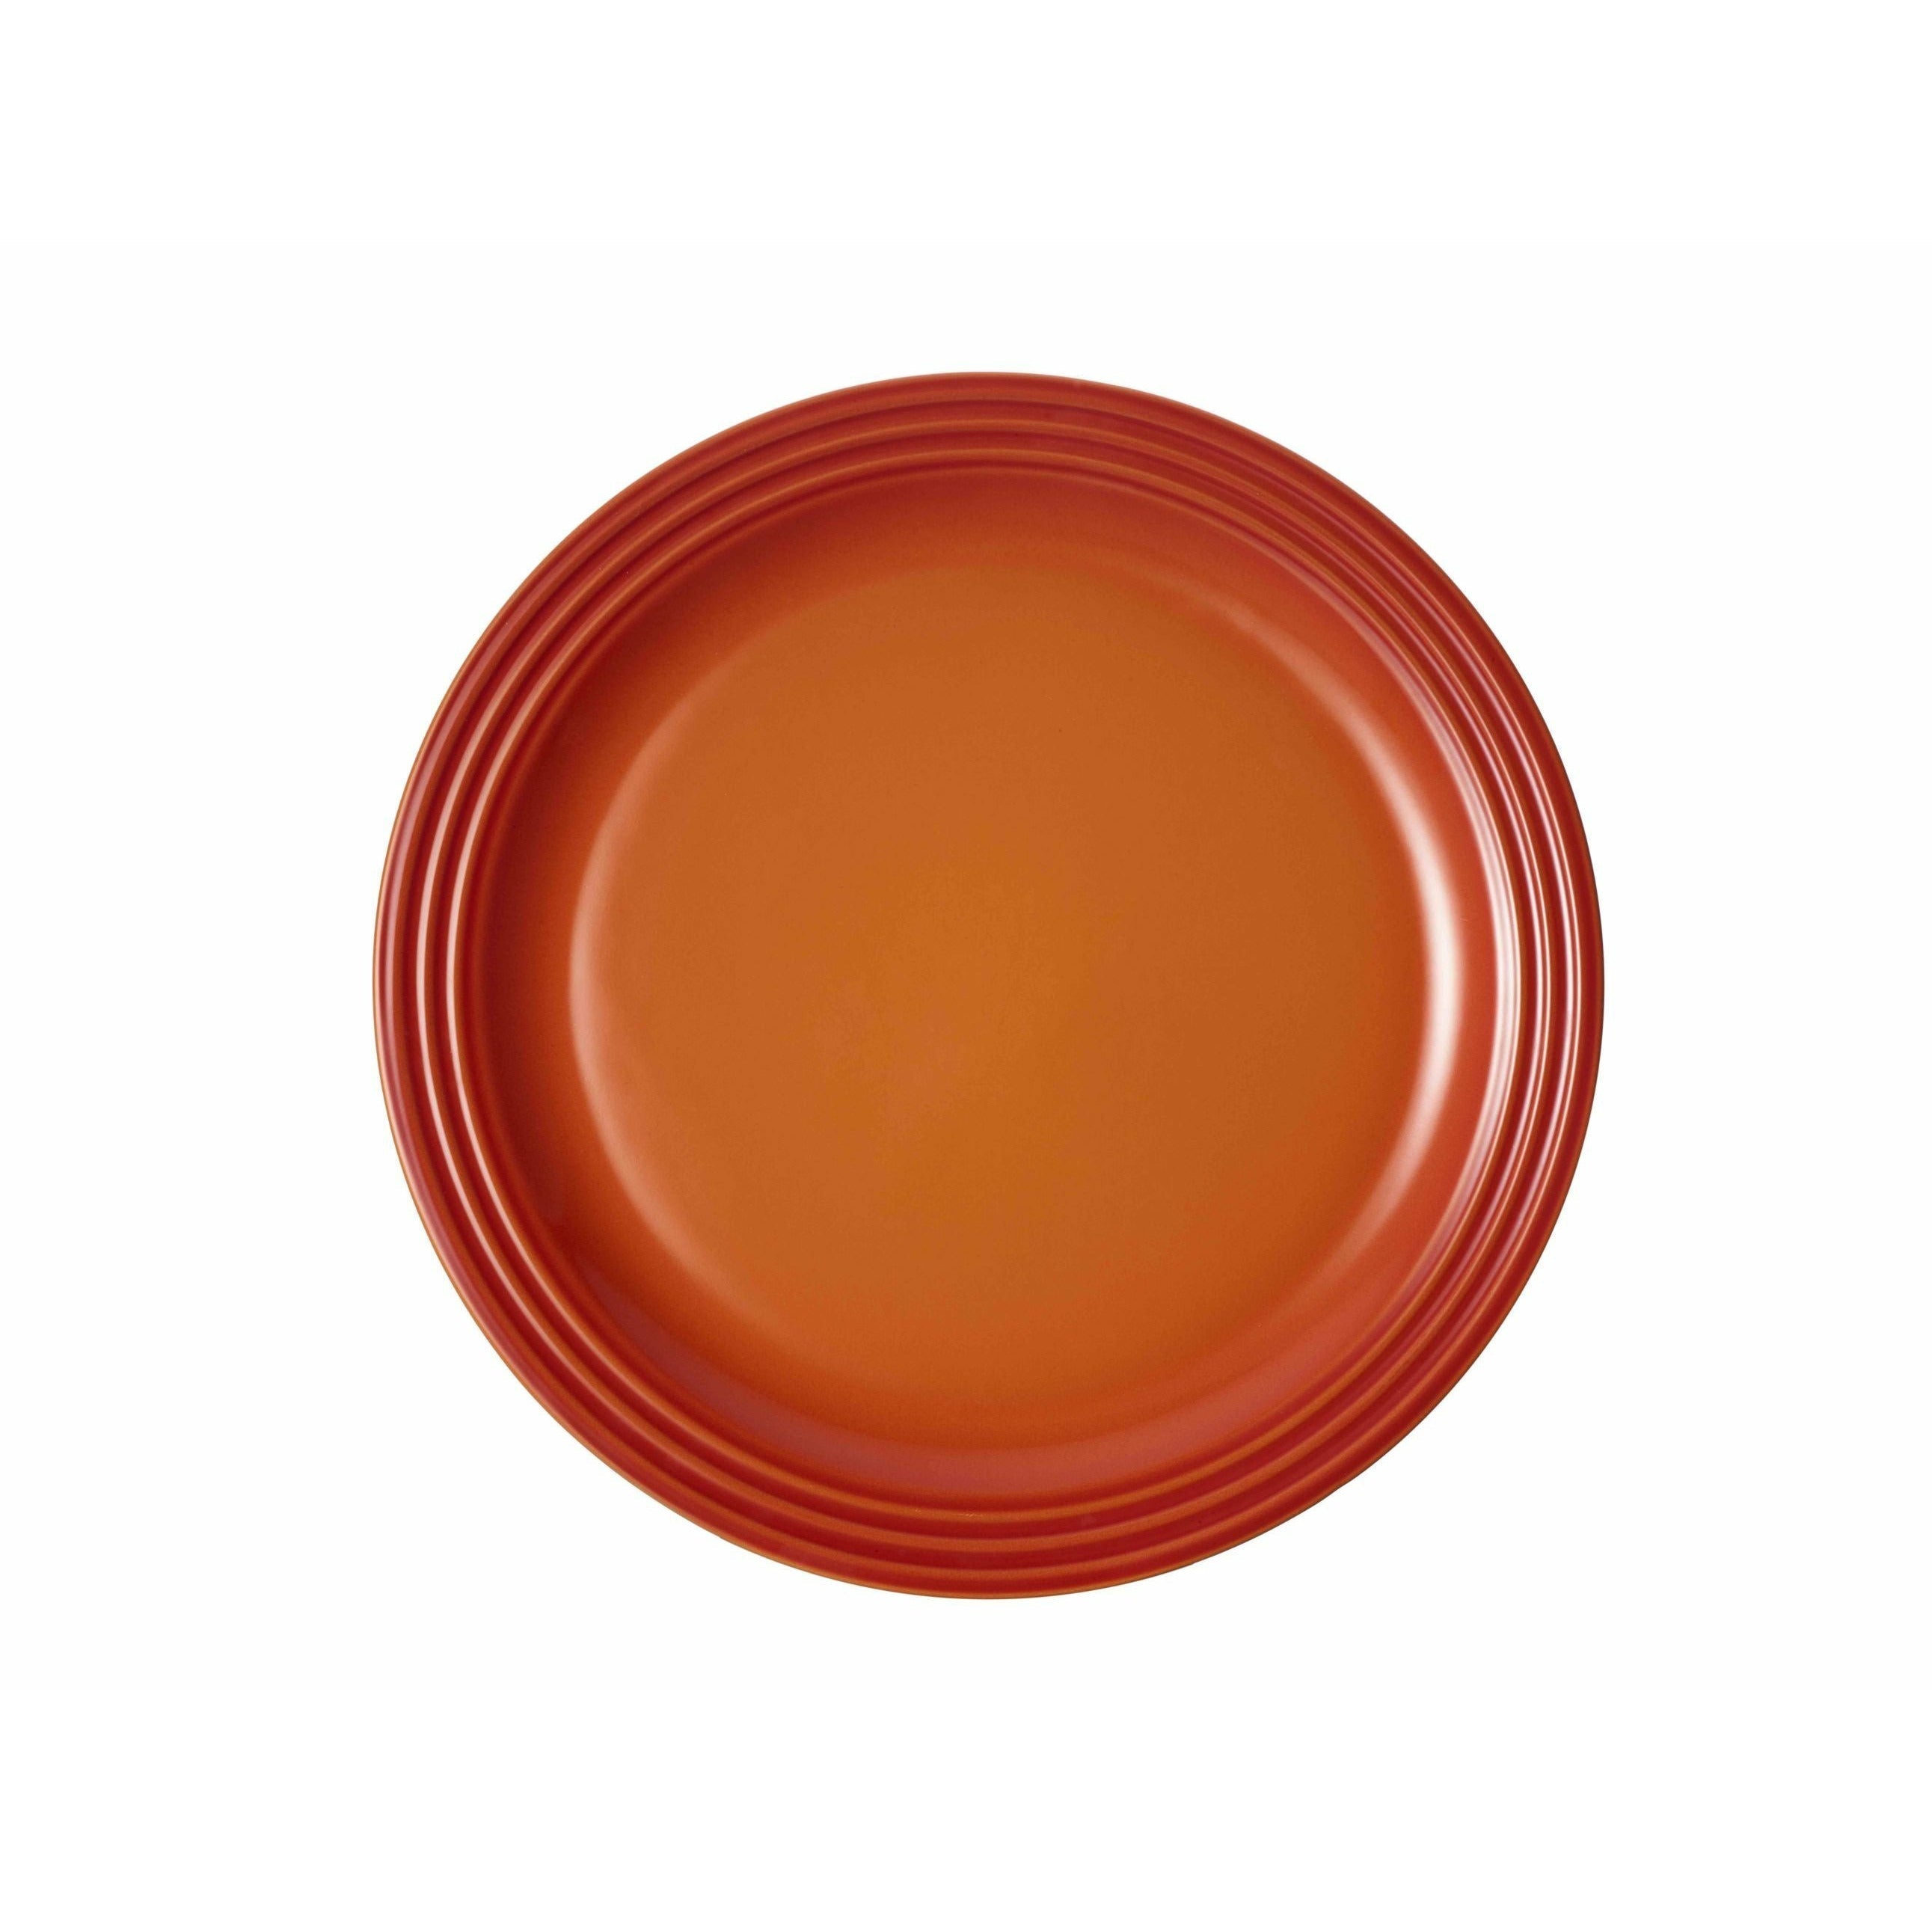 Le Creuset Signature Dinner Plate 27 Cm, Oven Red